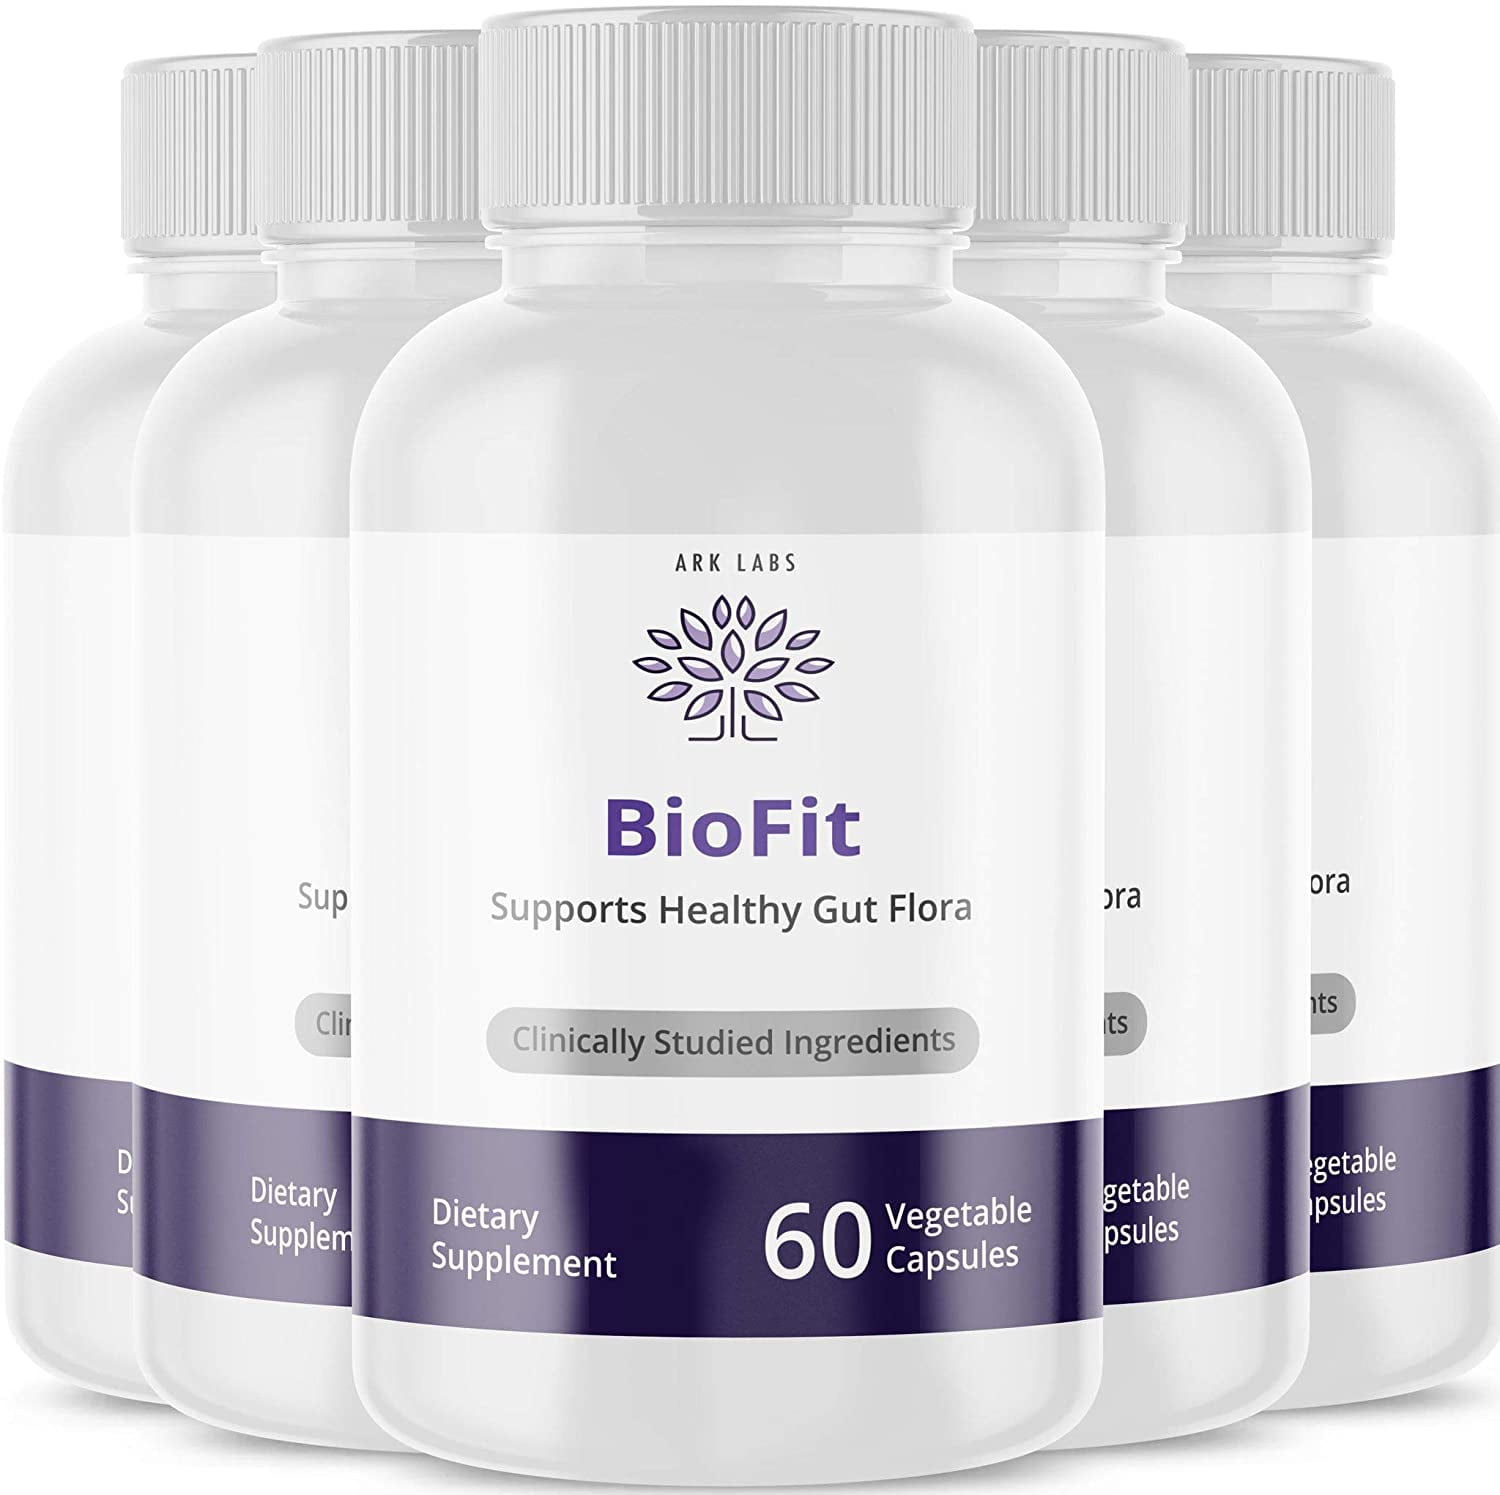 Is BioFit Probiotic Legit? Here's What They Won't Tell You!